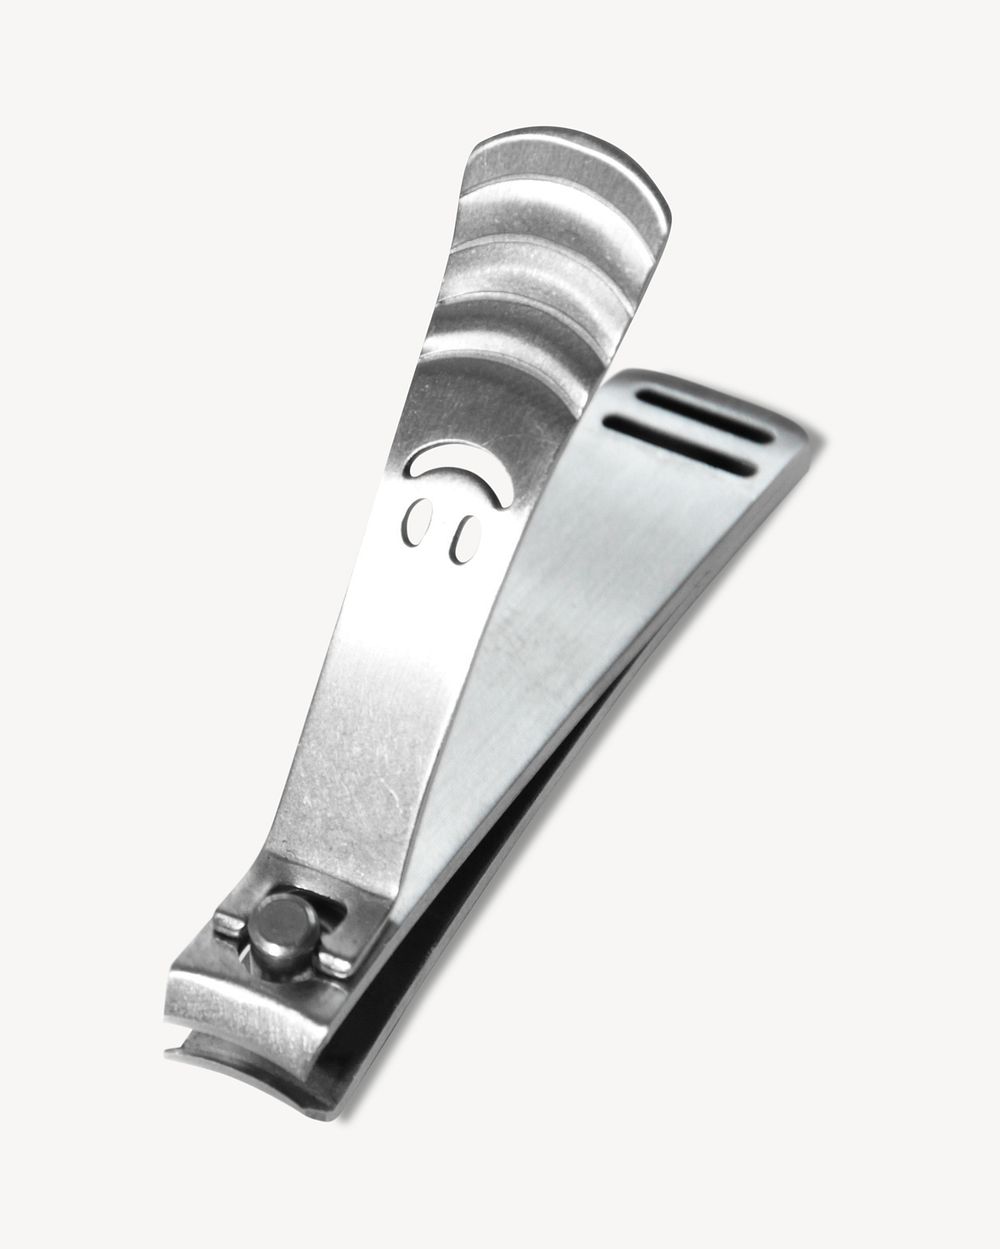 Nail clipper, isolated object